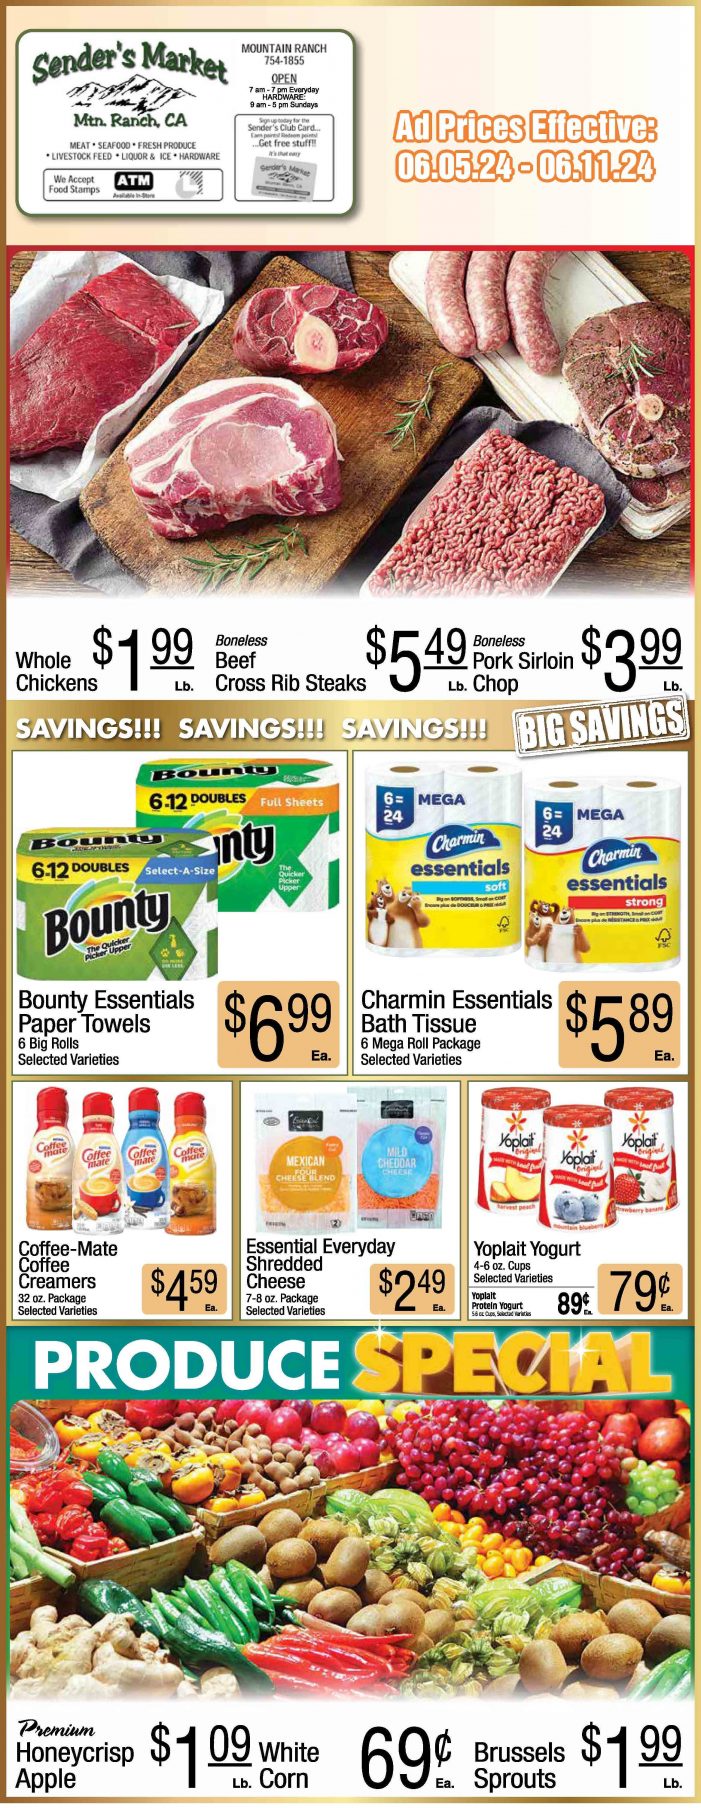 Sender’s Market Weekly Ad & Grocery Specials Through June 11th! Shop Local & Save!!